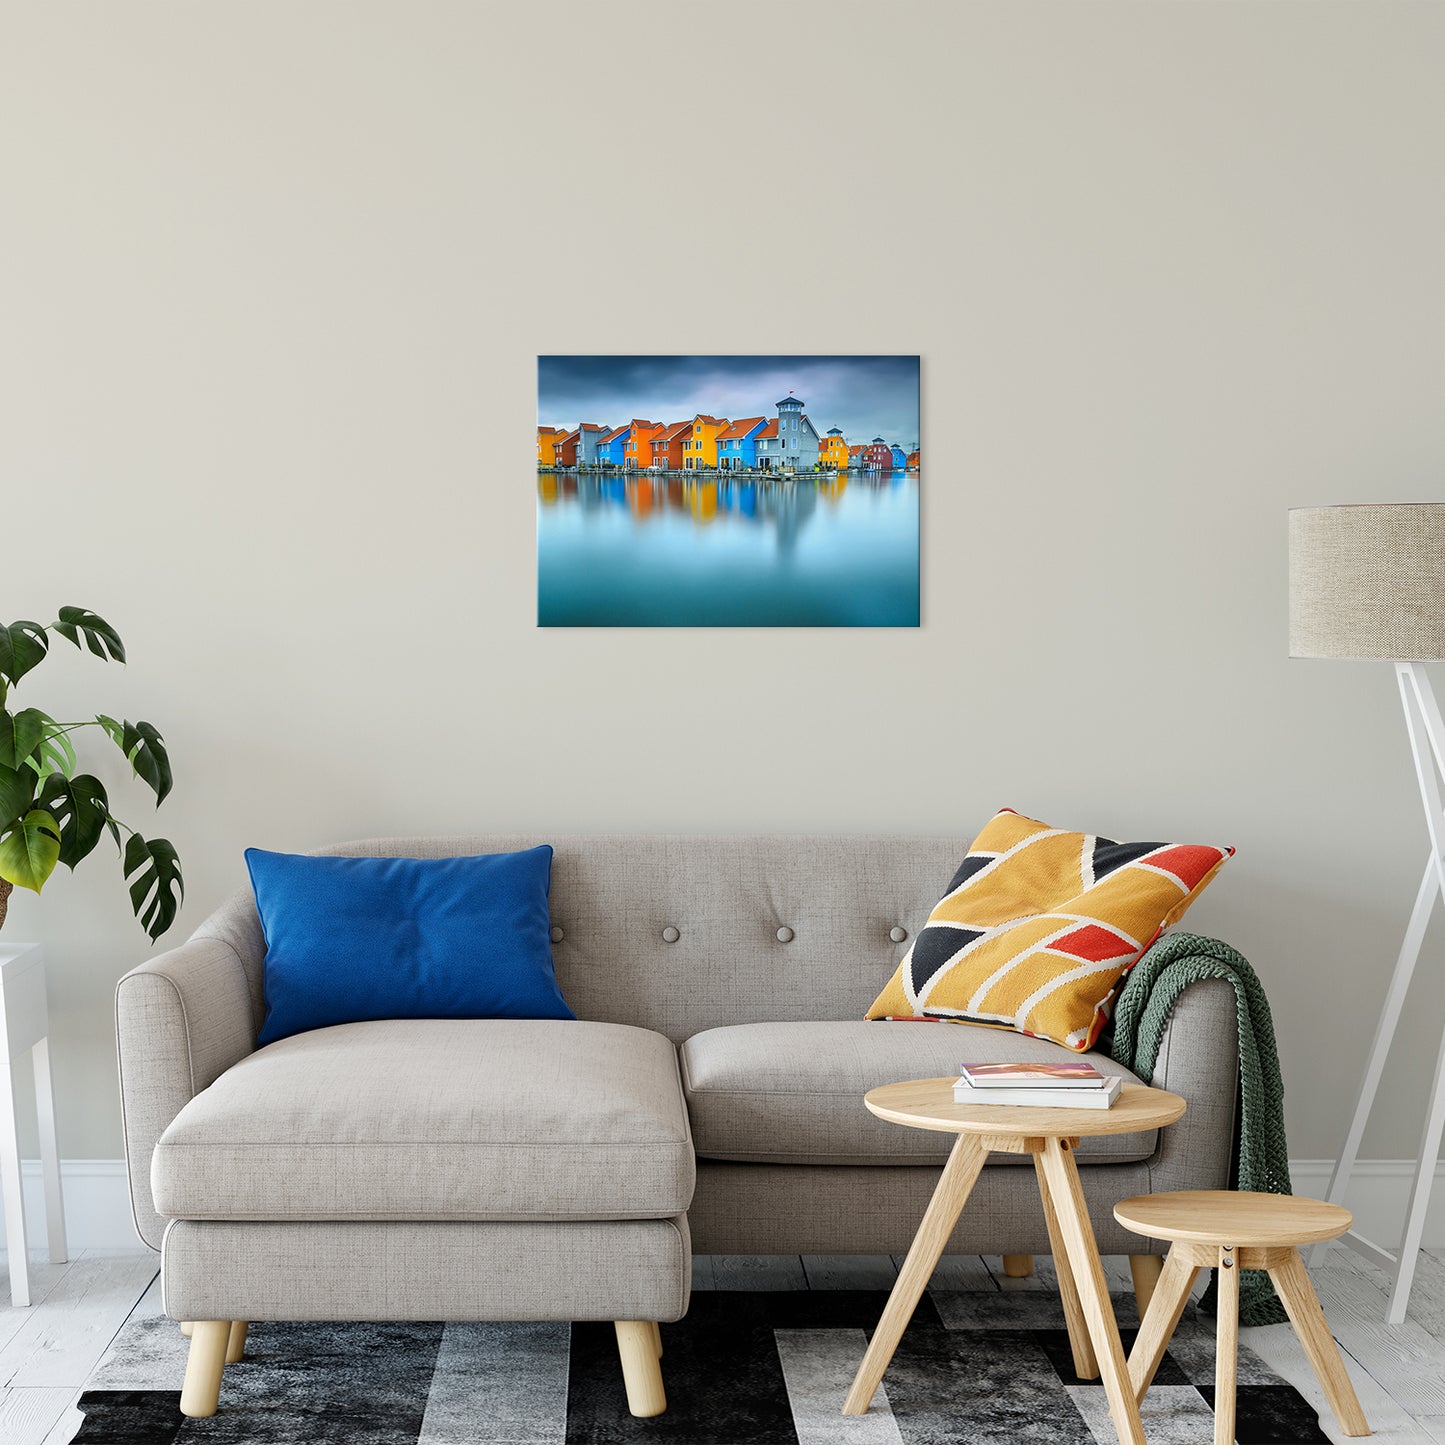 Blue Morning at Waters Edge Groningen Netherlands Europe Landscape Wall Art Canvas Prints 20" x 30" - PIPAFINEART